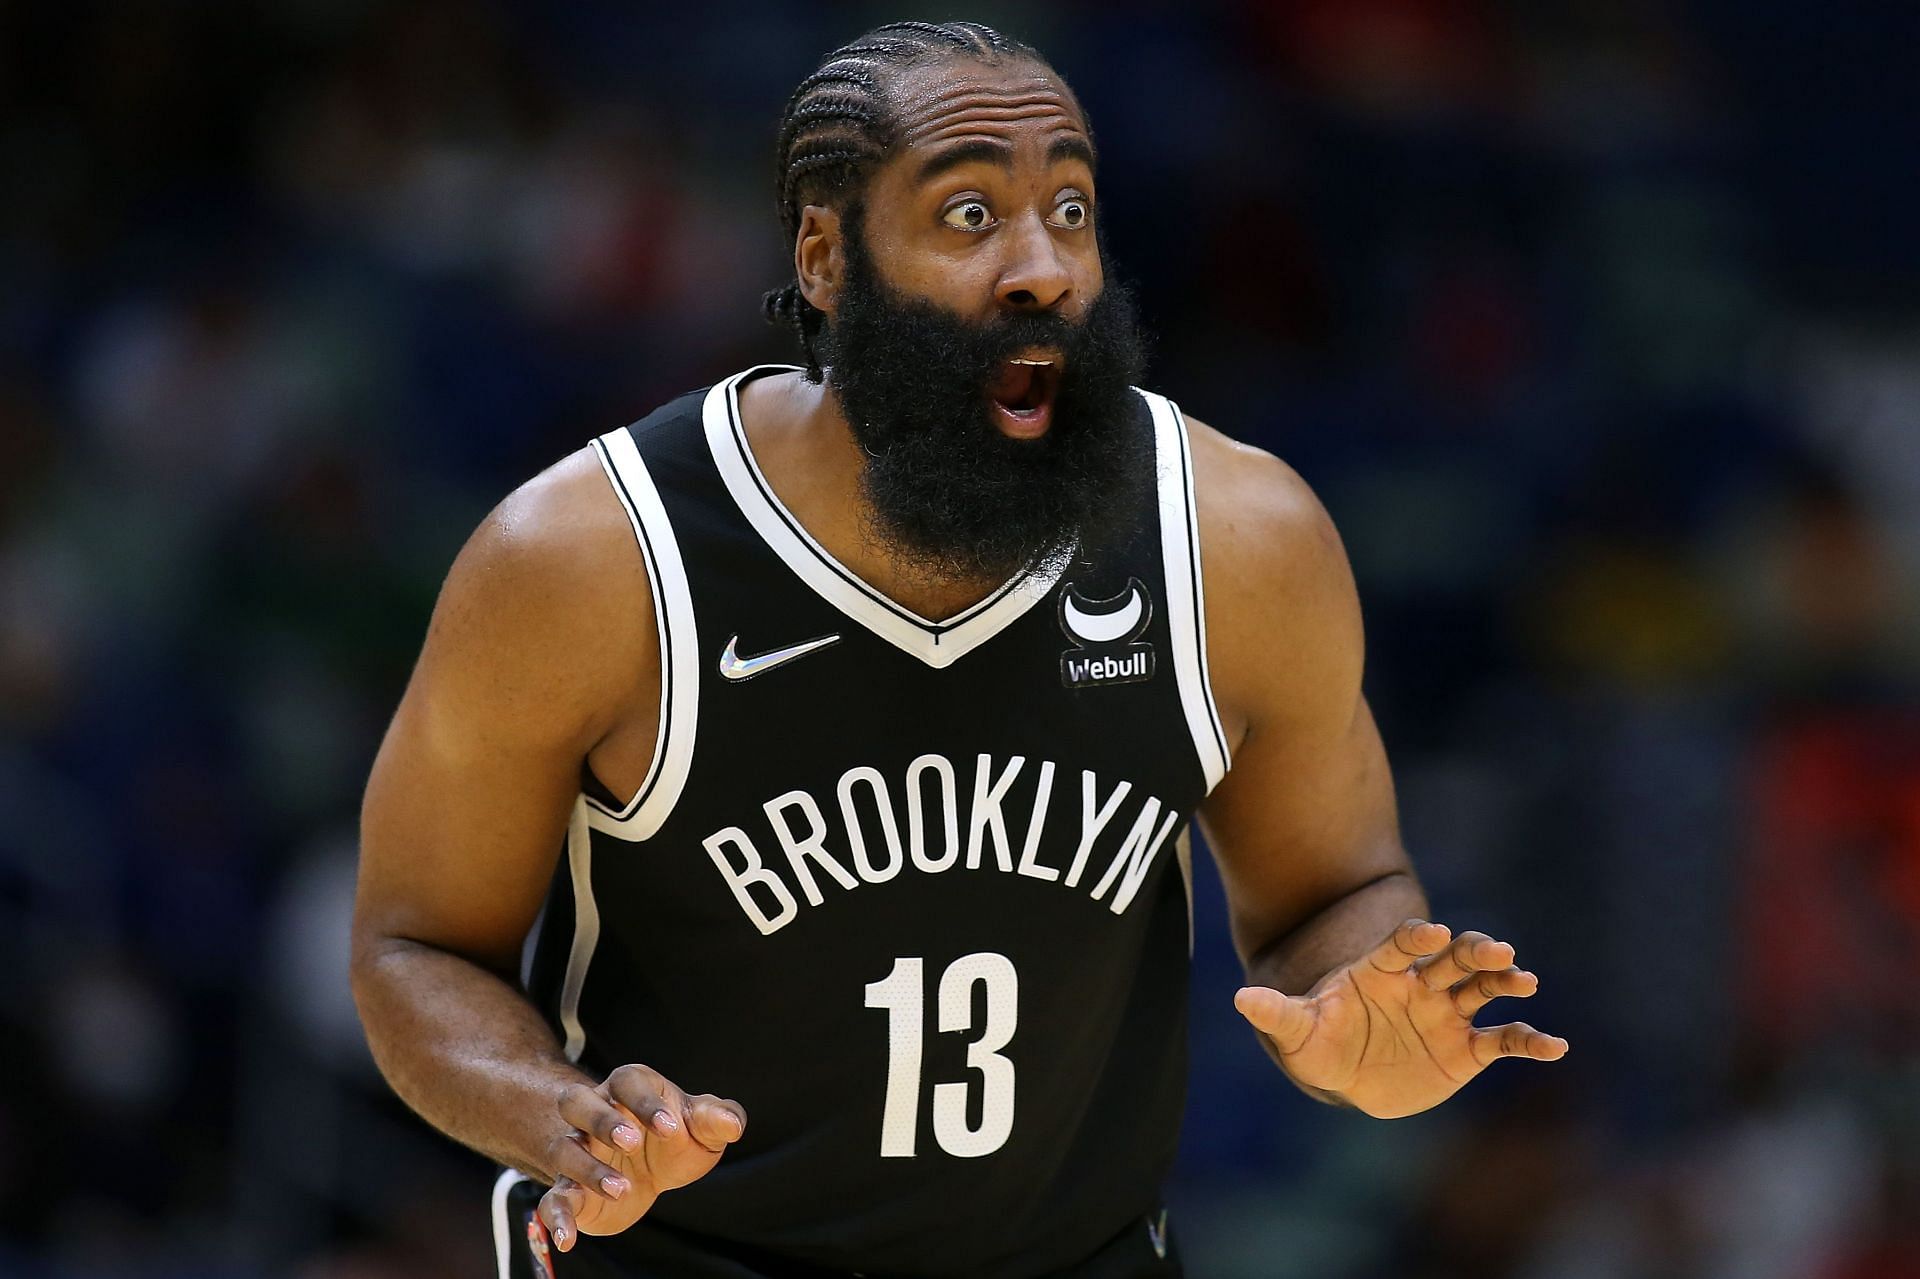 James Harden combined with Kevin Durant to drop 67 points in the Nets win over the Pelicans